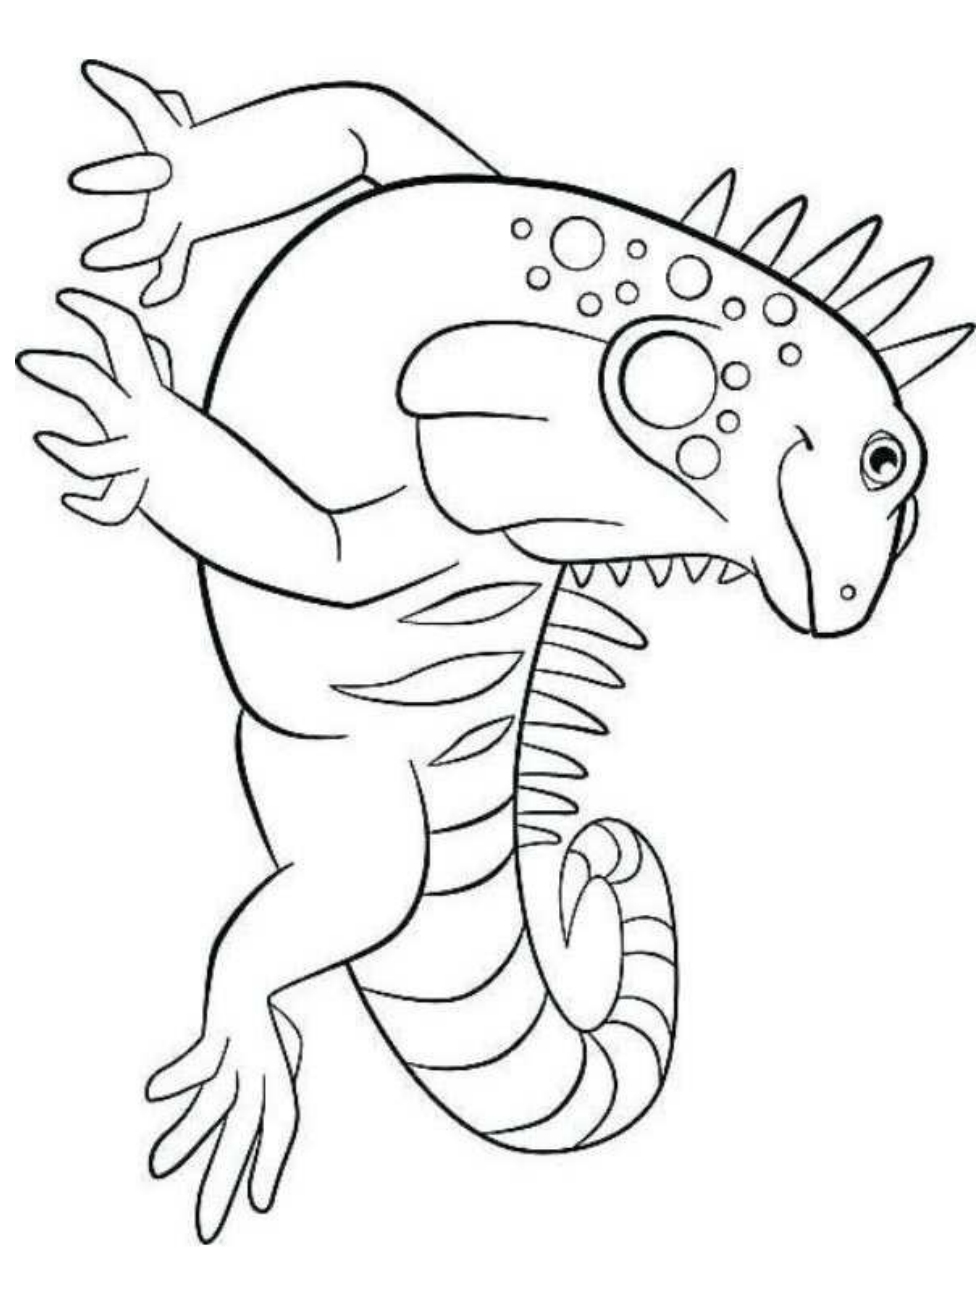 Drawing 5 from iguanas coloring page to print and coloring